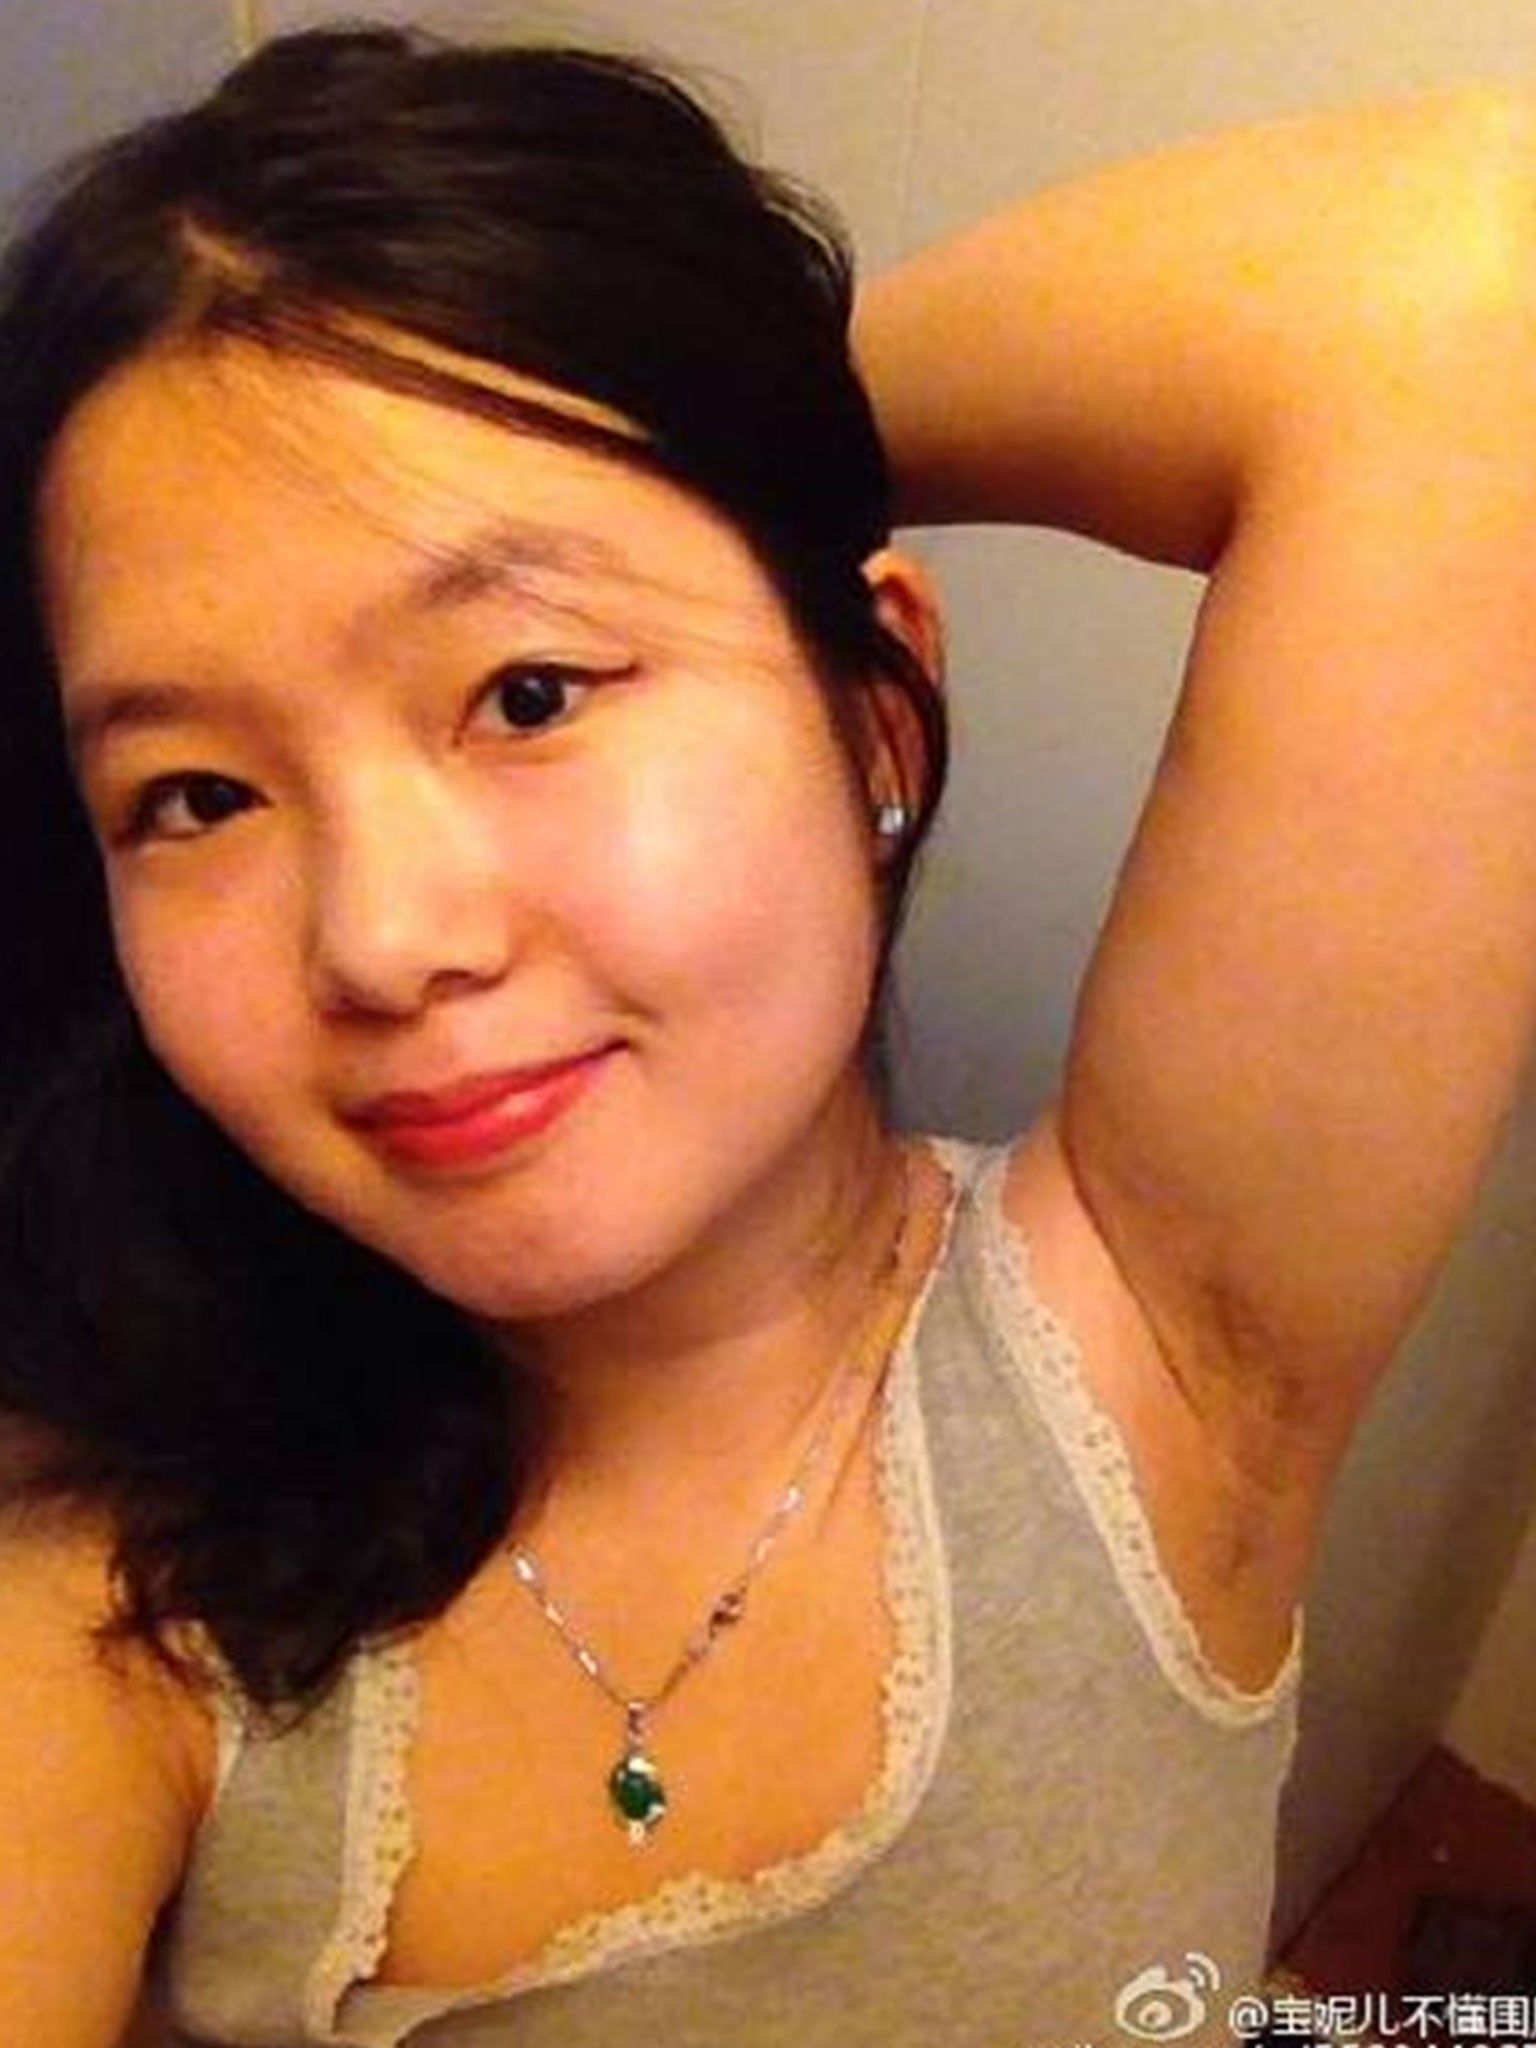 Chinese feminists are sharing photo of their armpit hair as part